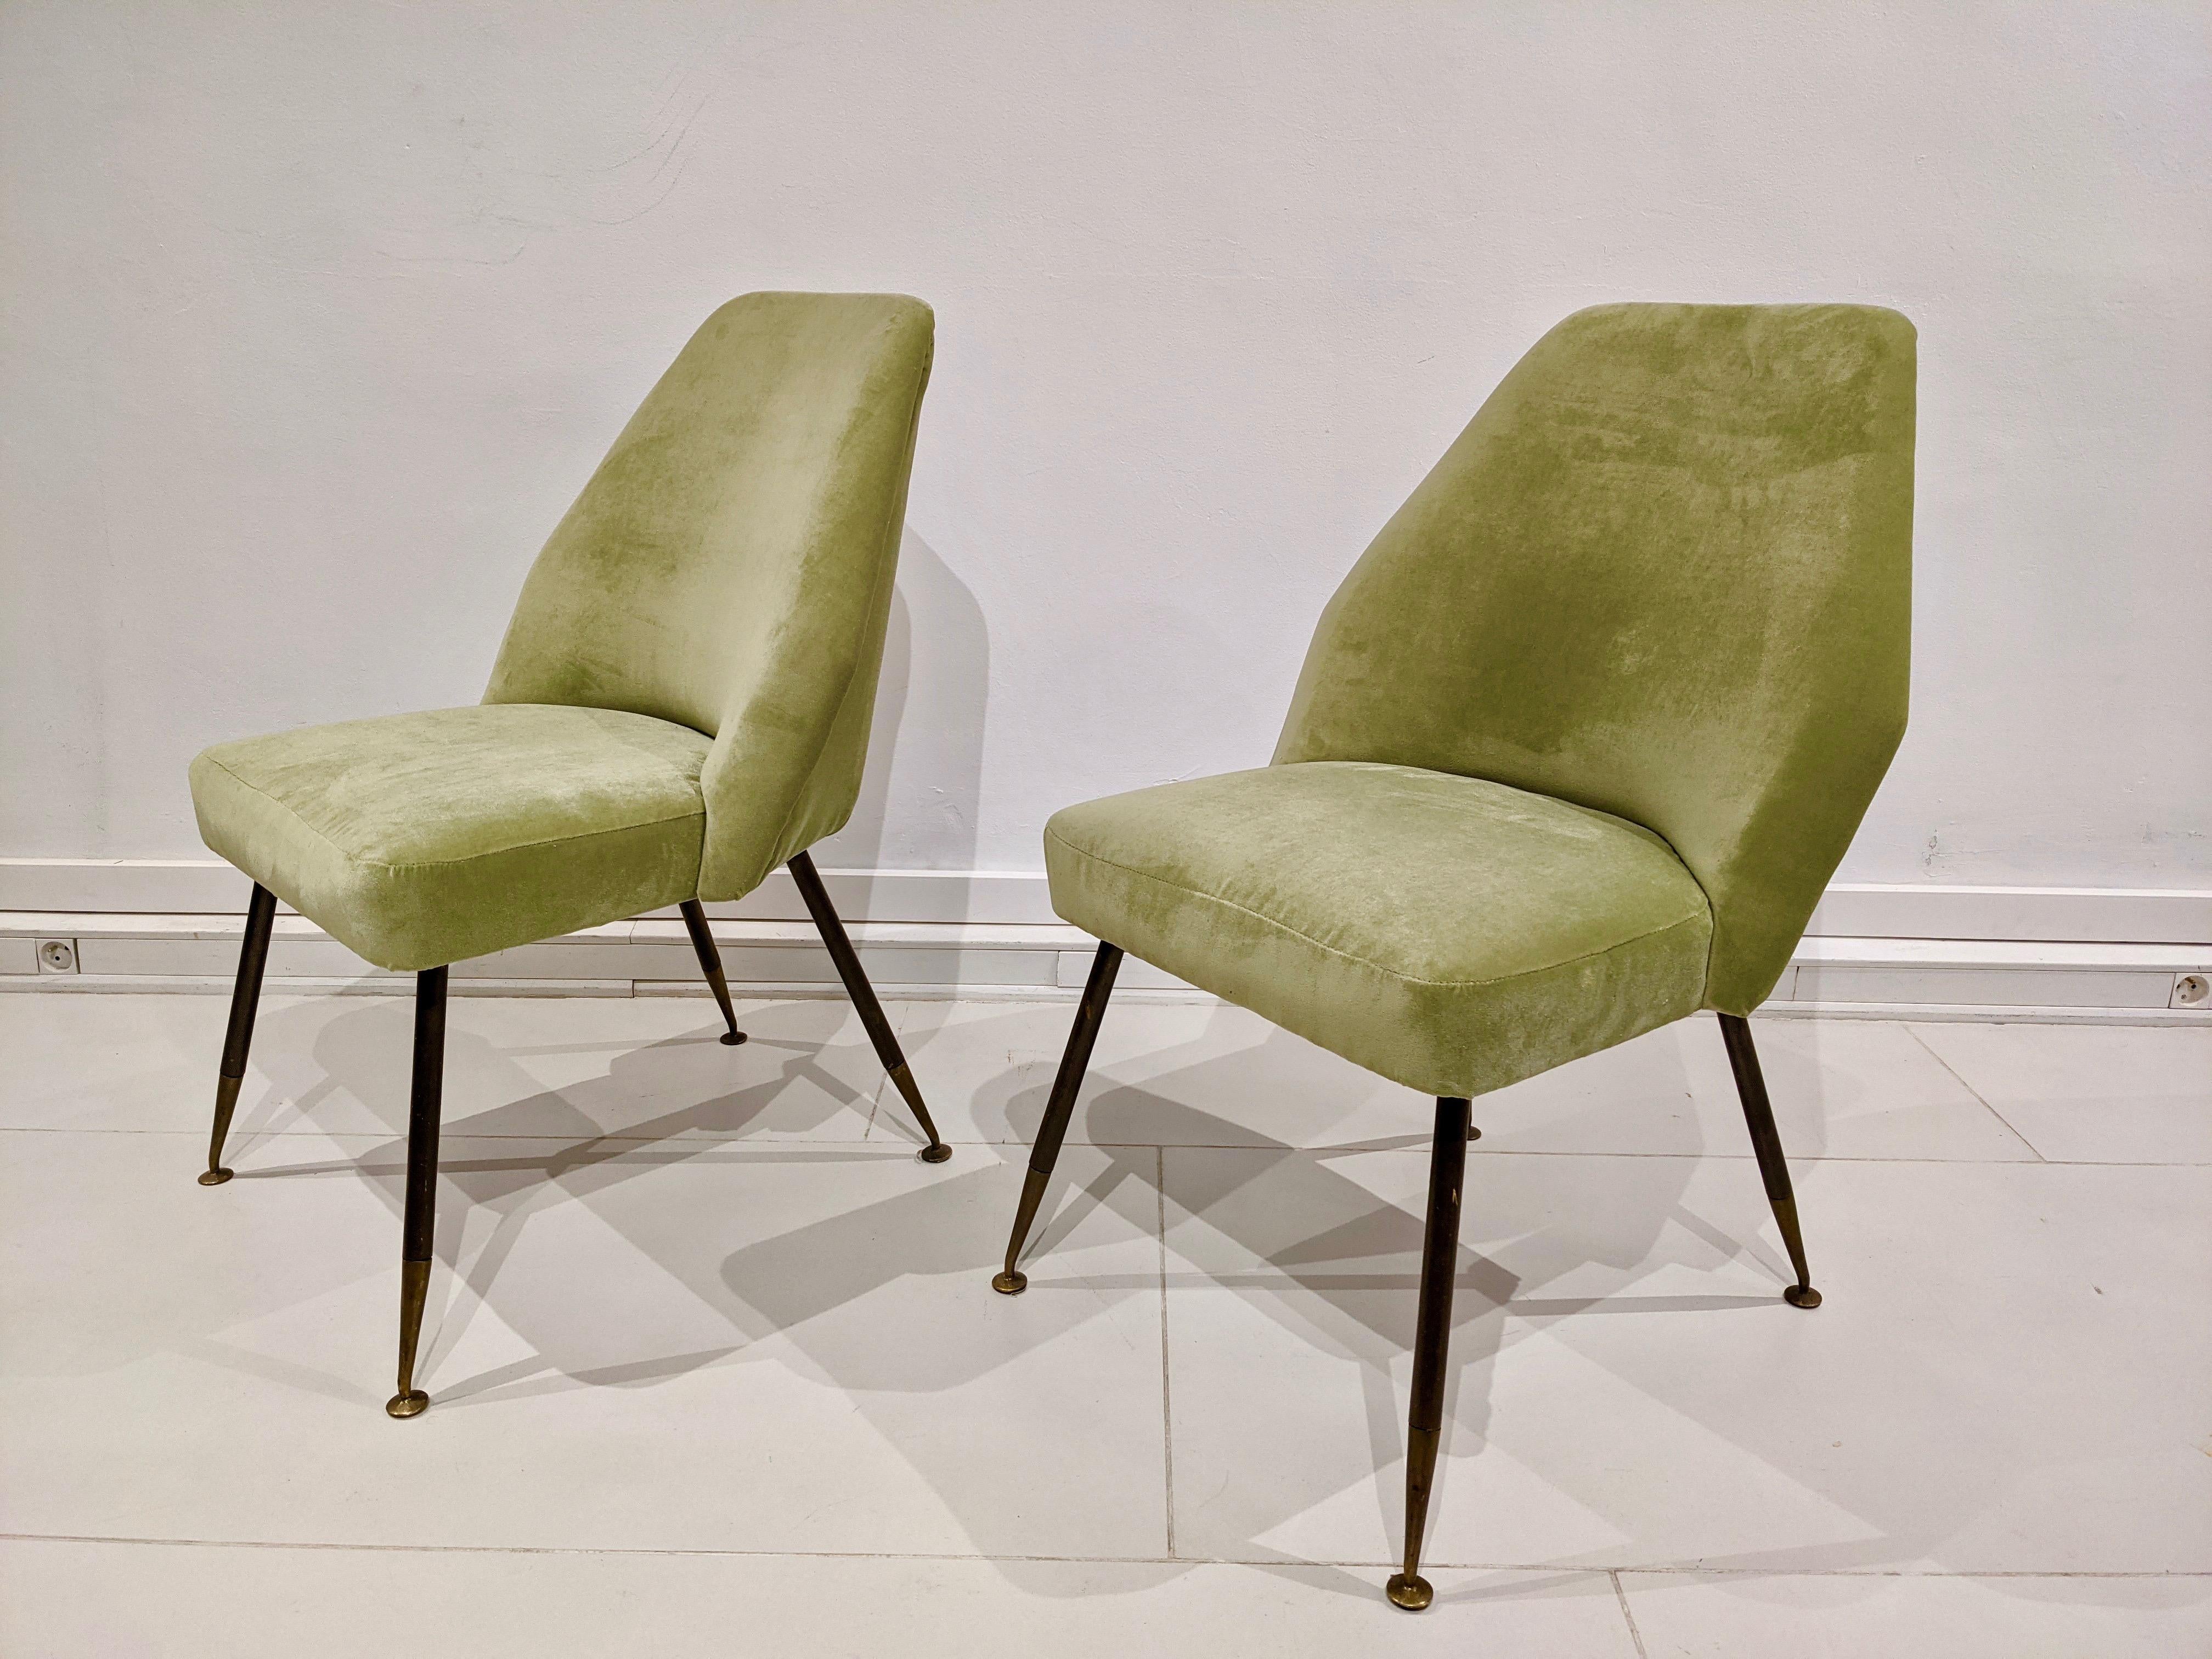 Set of two green Carlo Pagani chairs, Arflex edition 1960. Very good condition. Green fabric and brass frame.